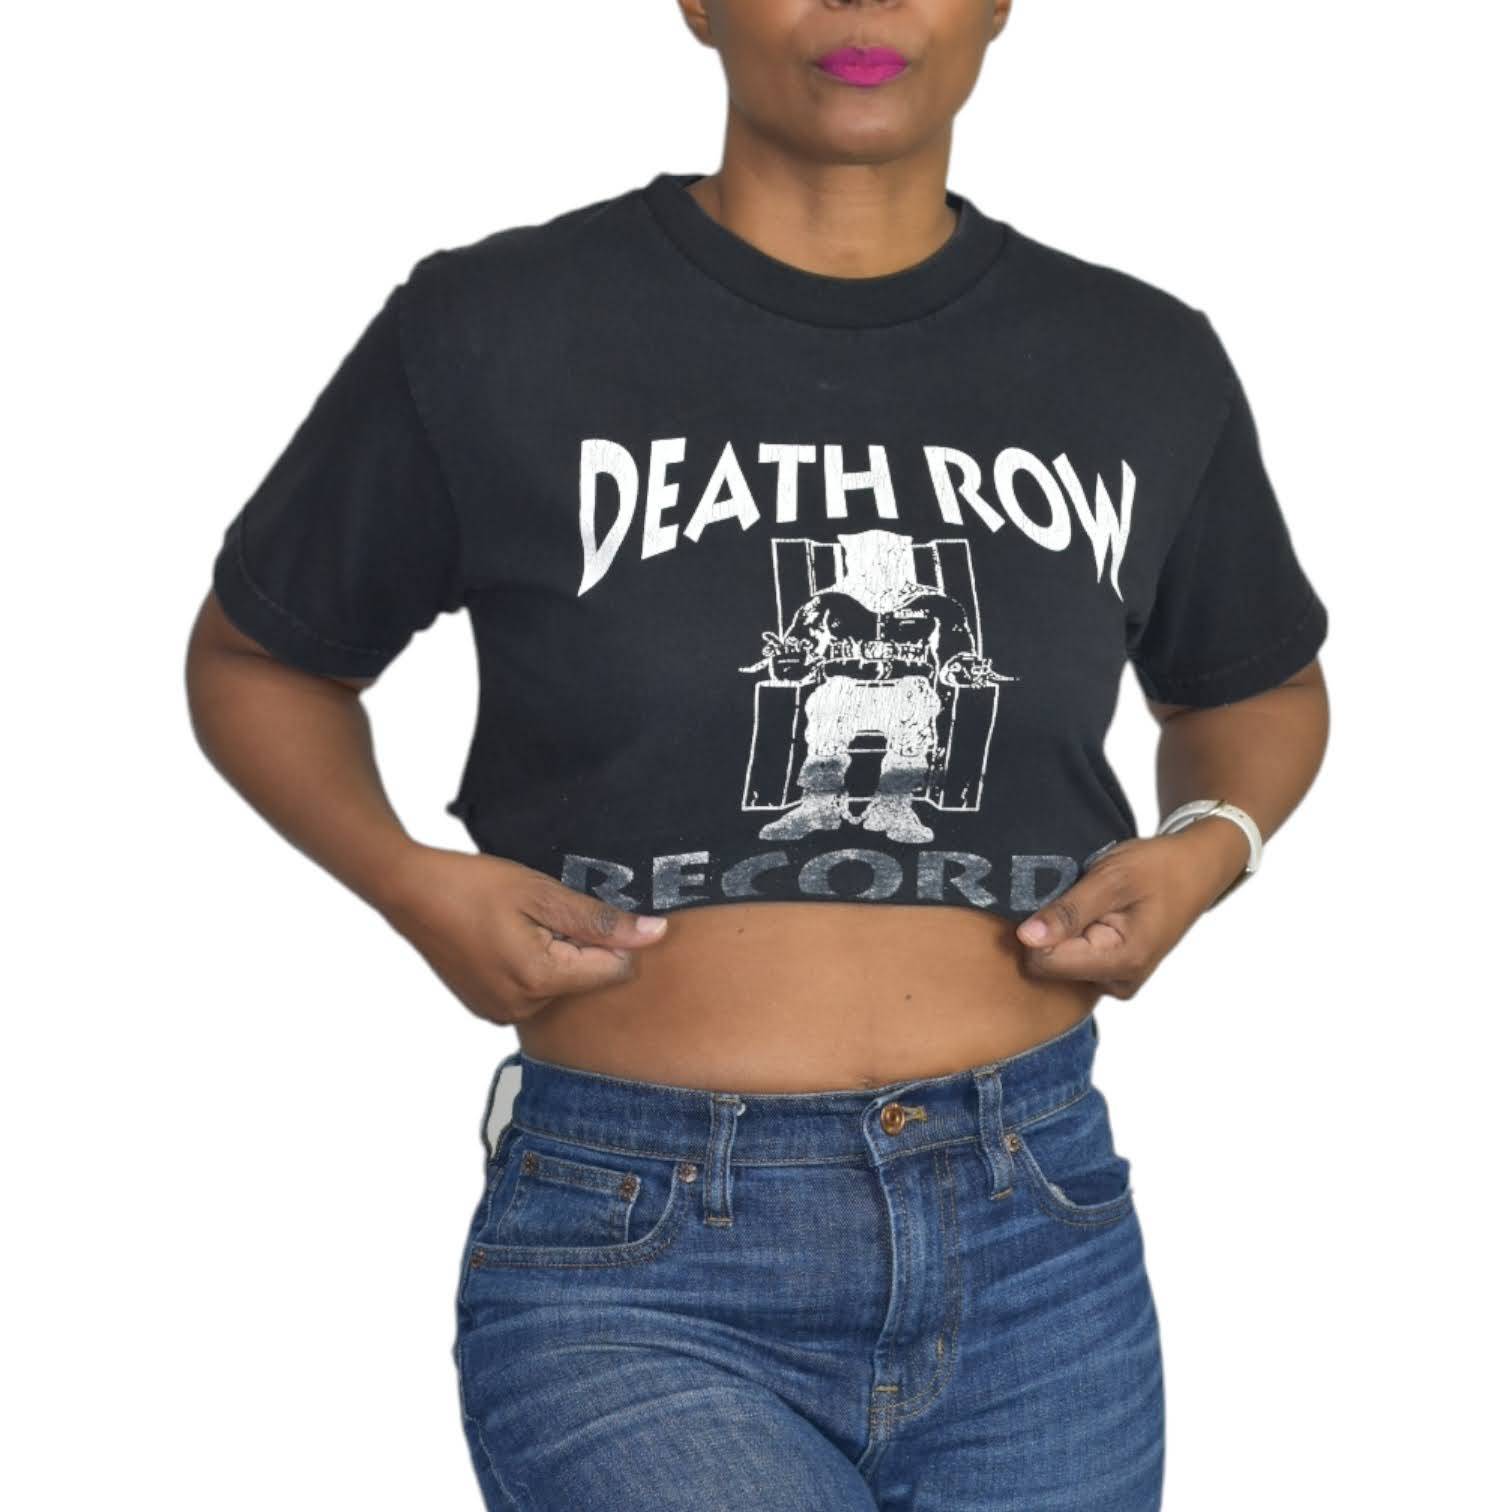 Vintage Death Row Records Cropped Tee T Shirt Unisex Cutoff Broken In Size Small